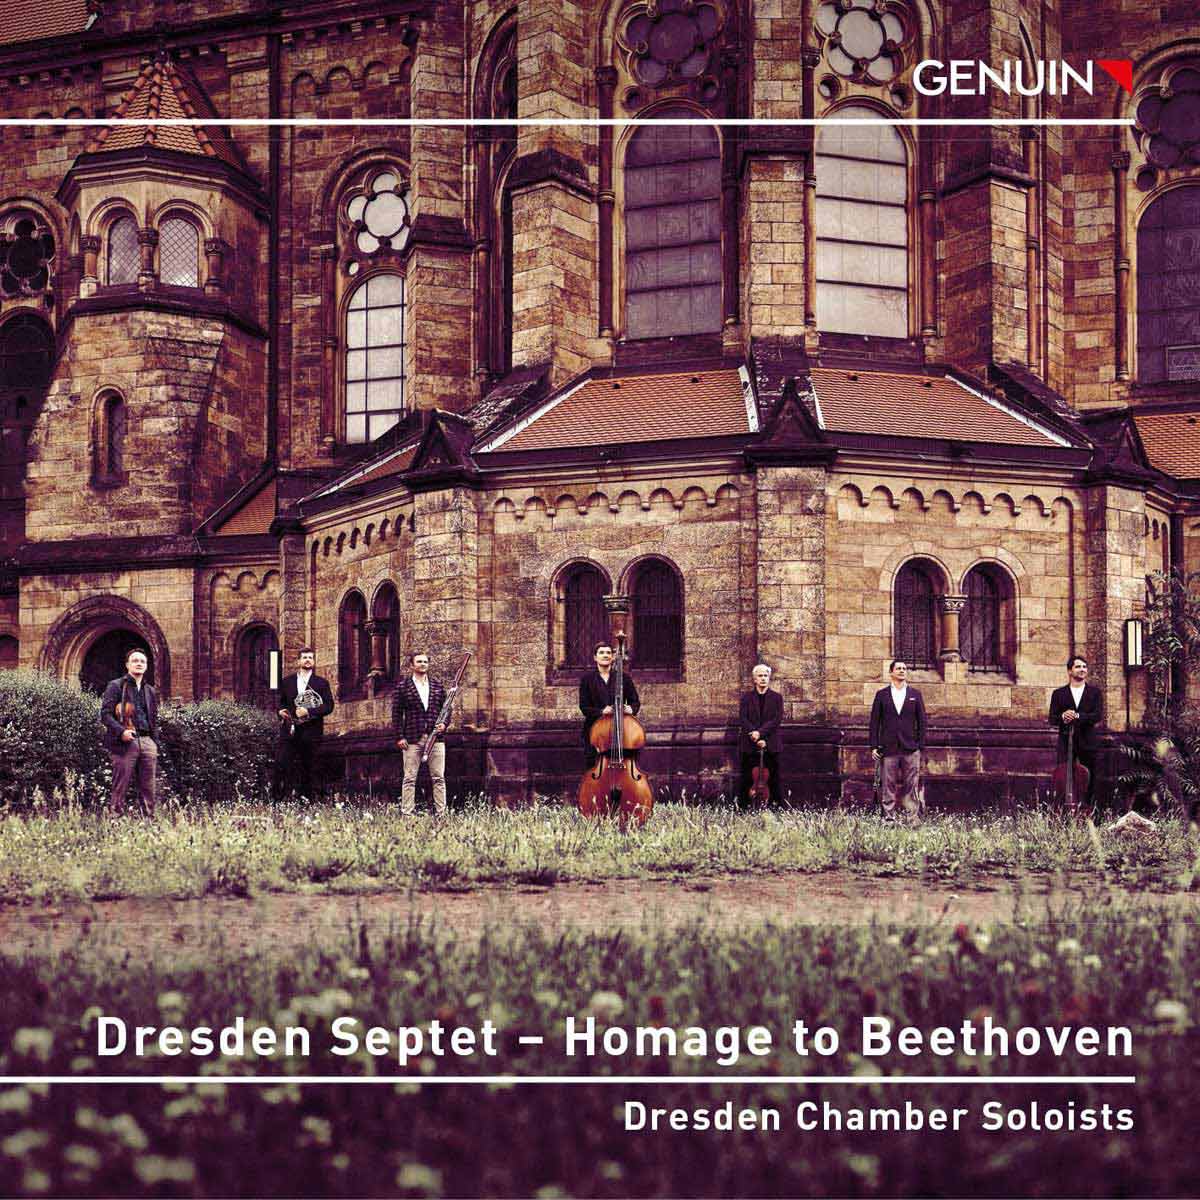 CD album cover 'Dresden Septet – Homage to Beethoven ' (GEN 23805) with Dresden Chamber Soloists